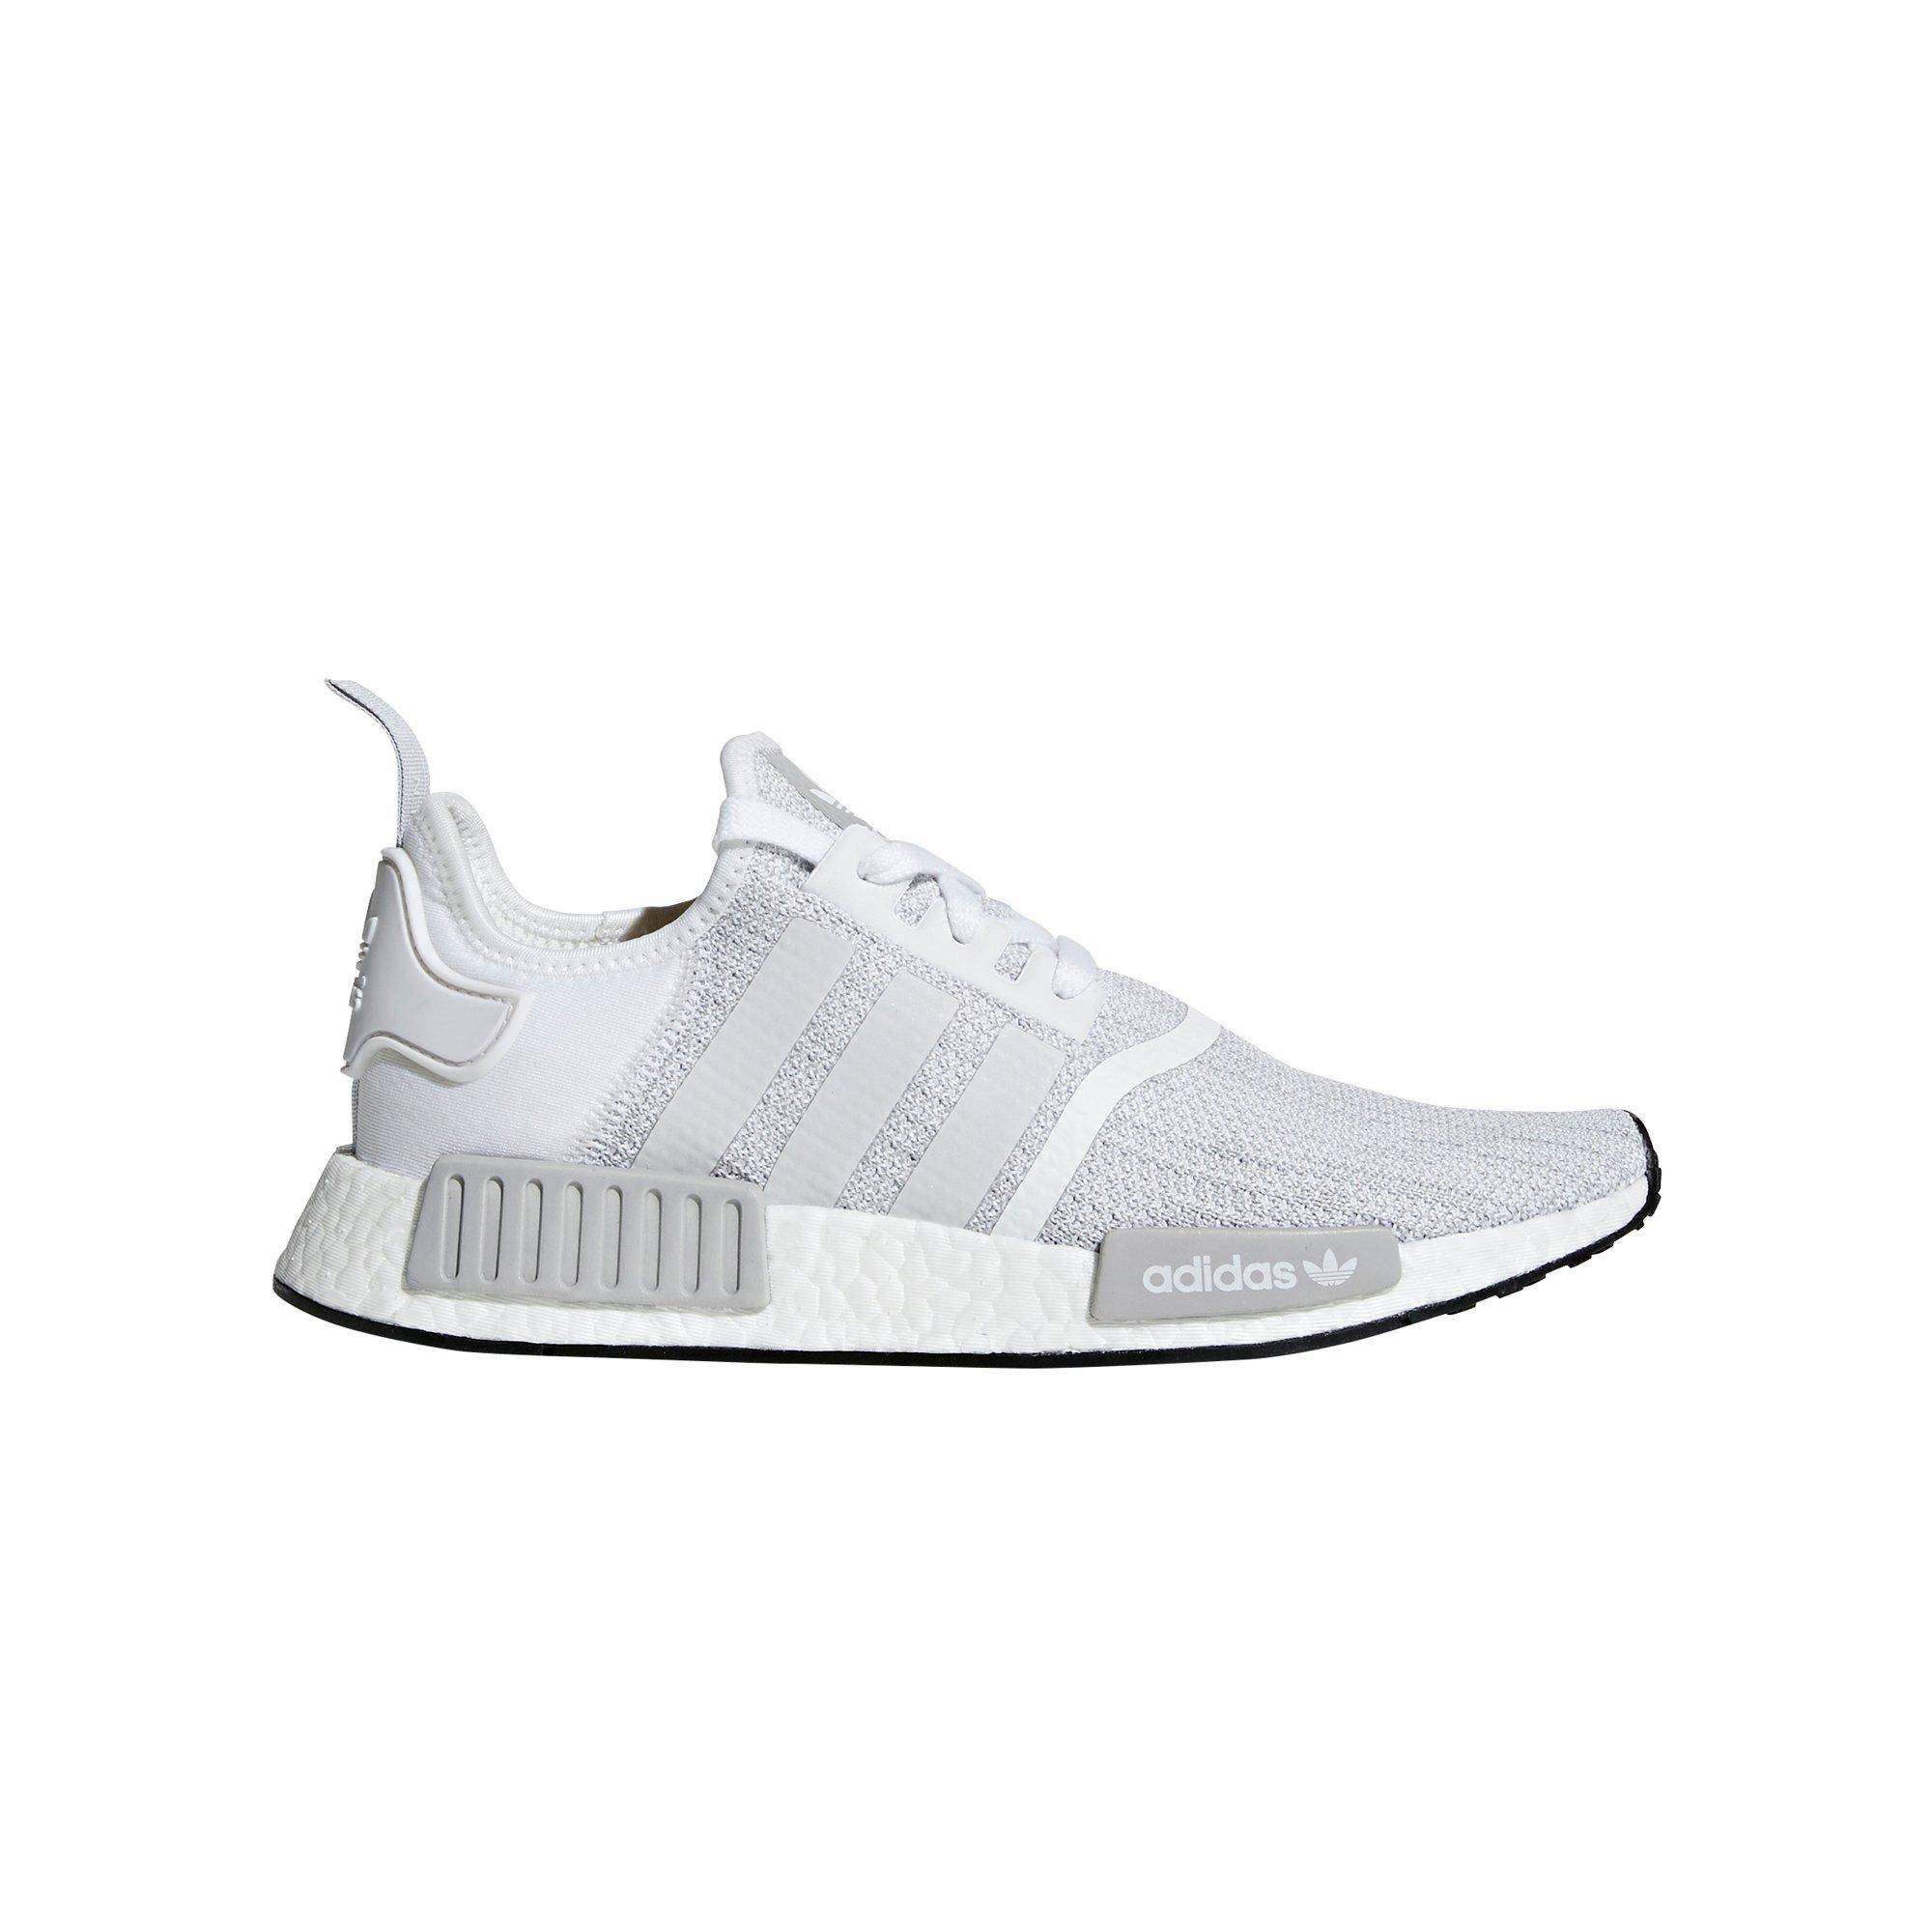 adidas NMD XR1 Triple Gray Release Date BY992.